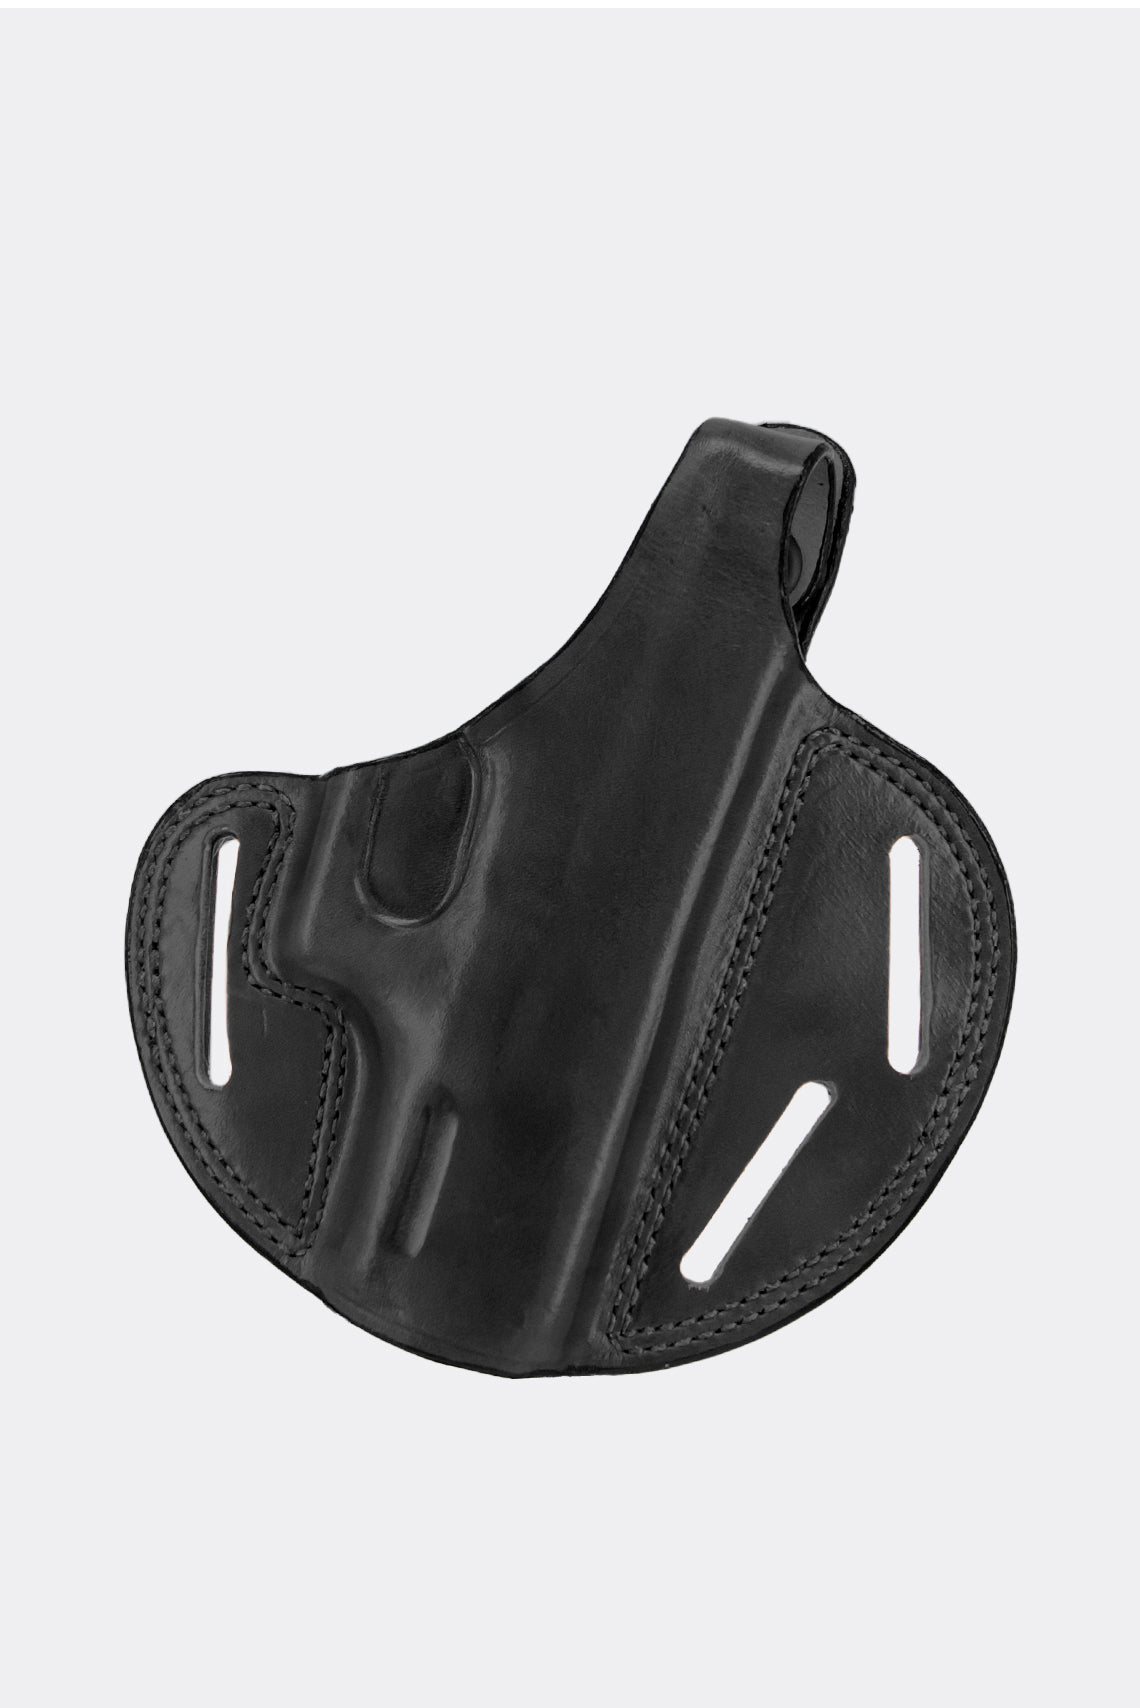 Discover Superior Quality with the Shadow® II Holster